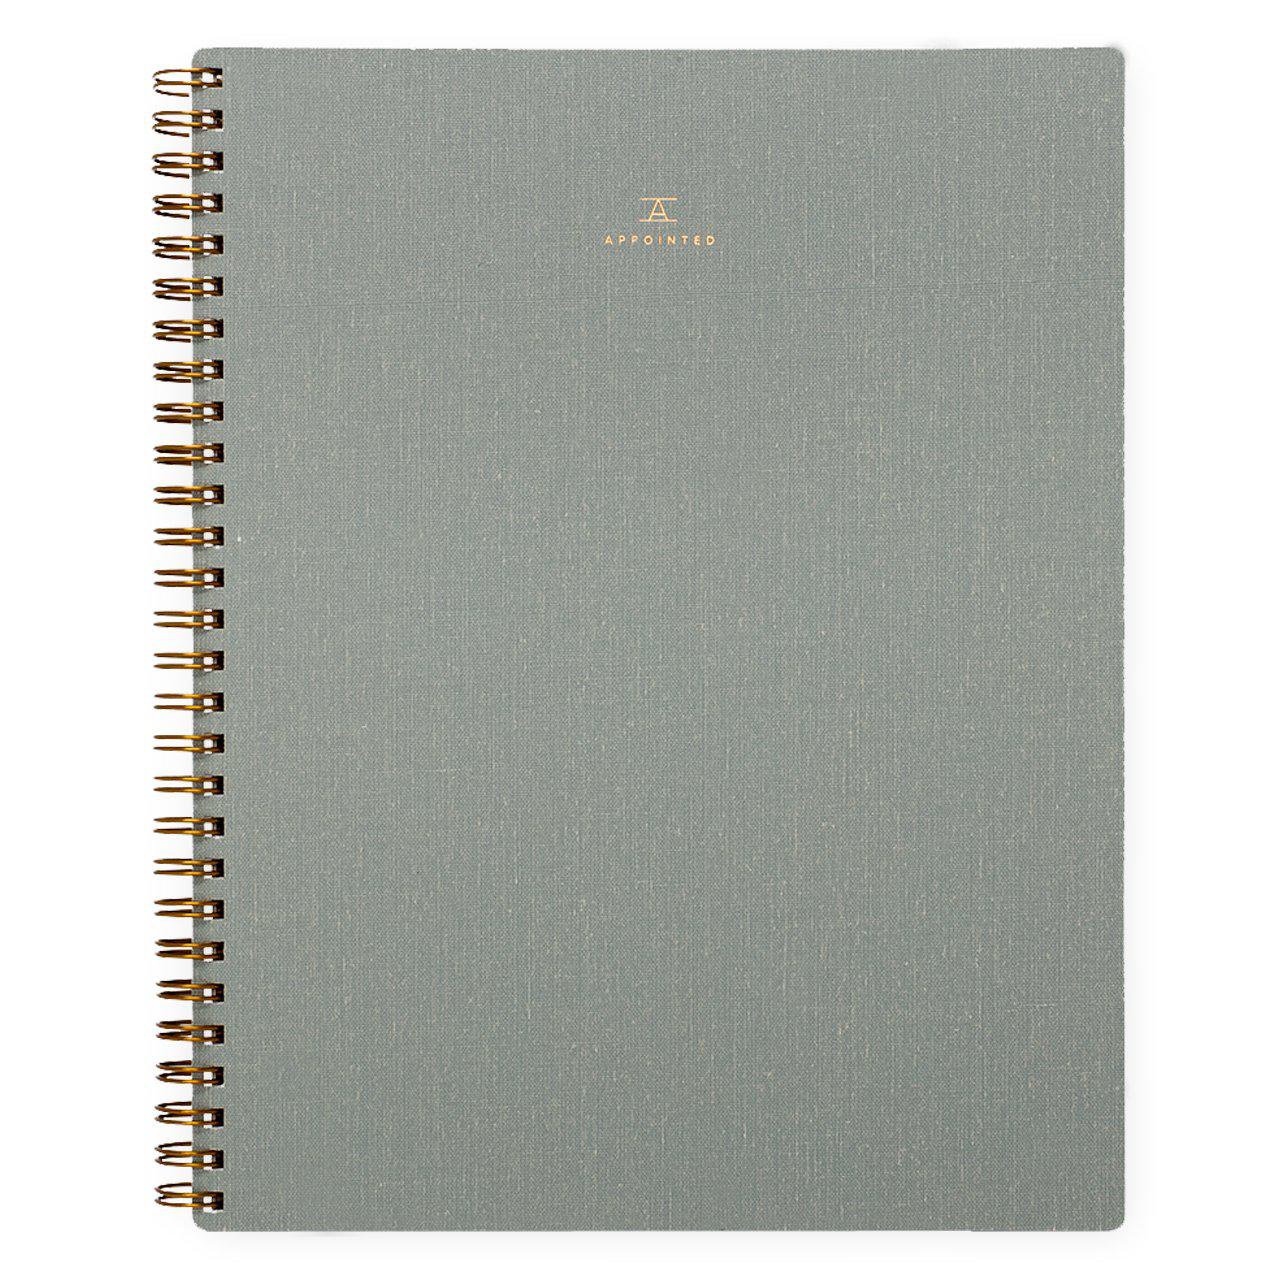 Appointed Dove Grey Notebook | Lined or Grid 